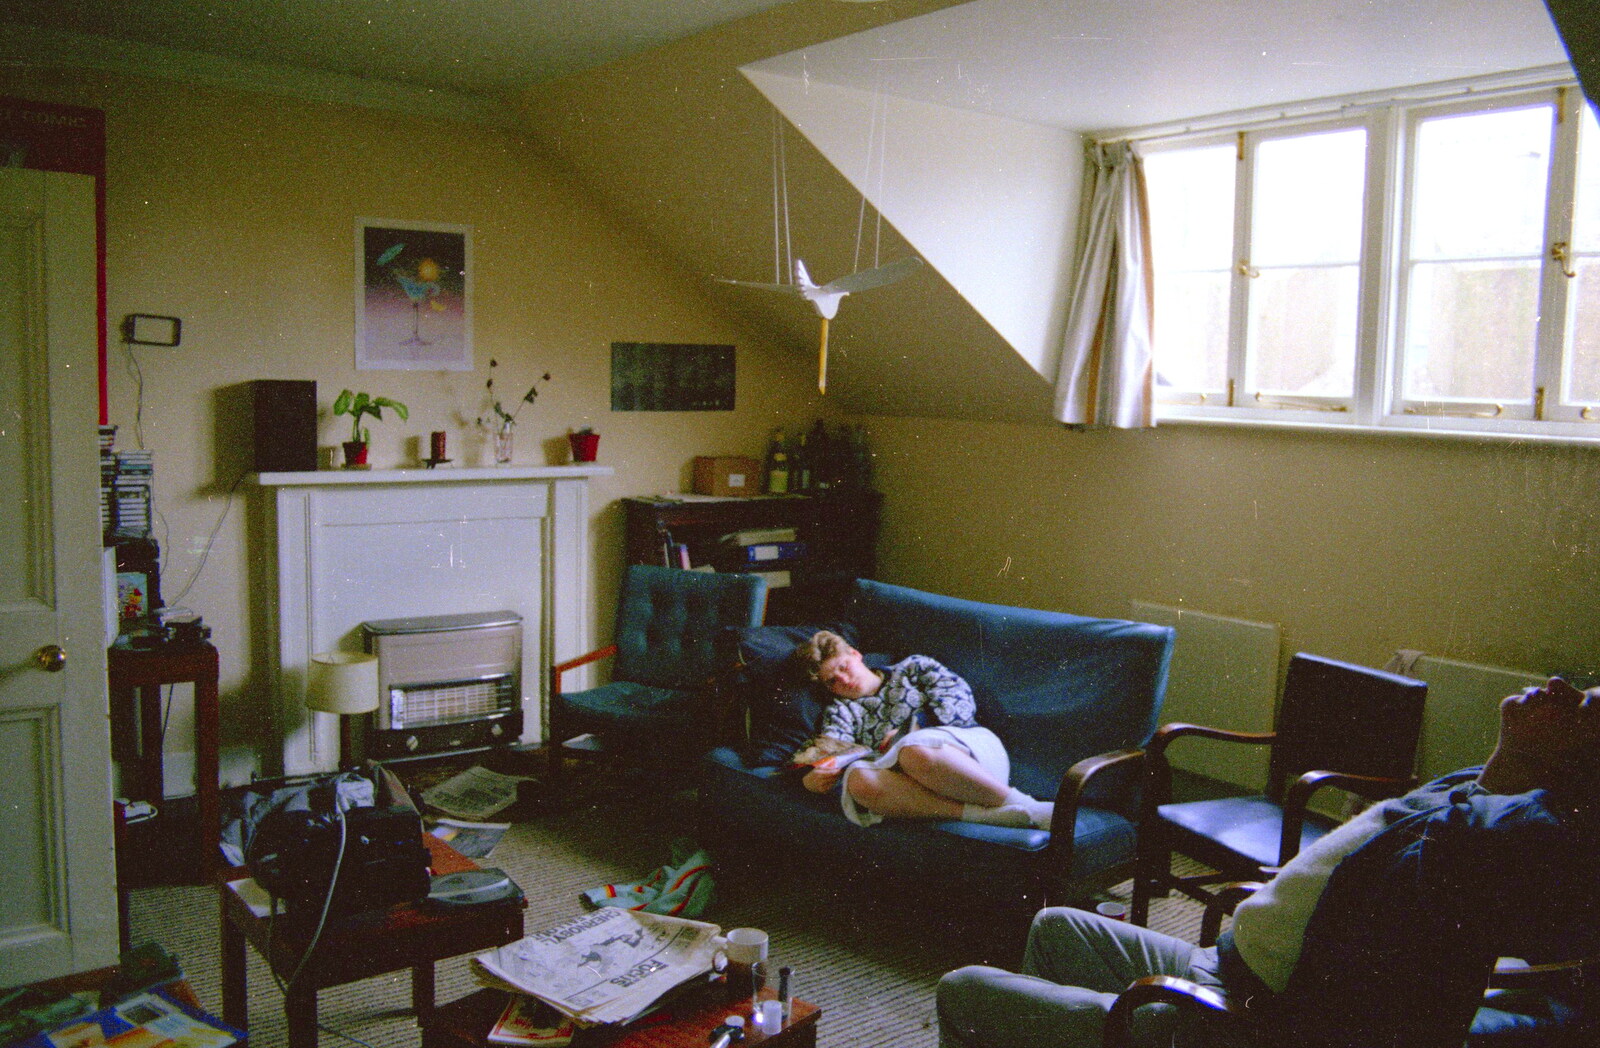 Anna has a doze on the sofa from A Trip to Trinity College, Cambridge - 23rd March 1986